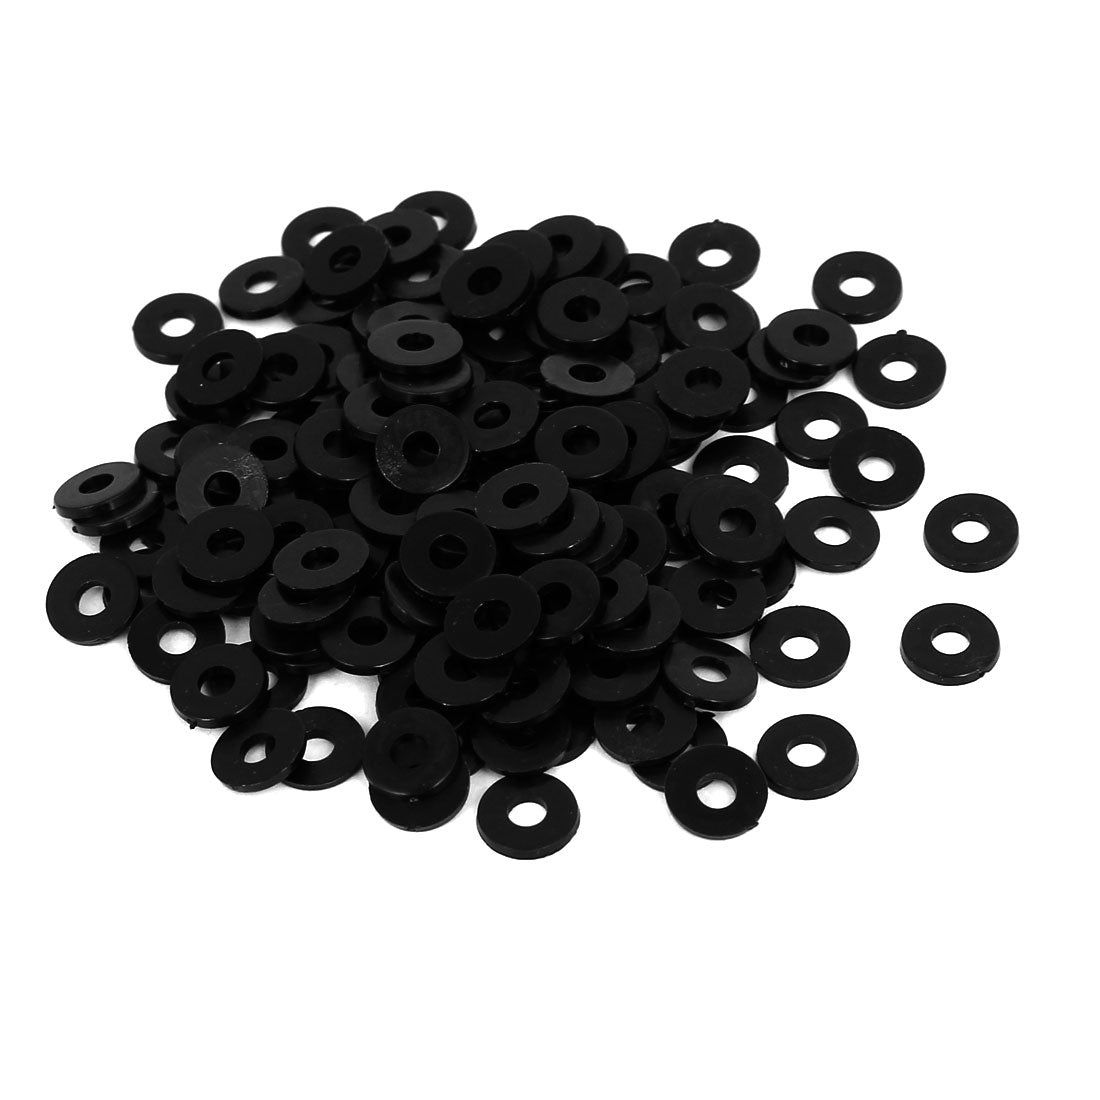 Uxcell Uxcell M3 x 8mm x 1mm Nylon Flat Insulating Washers Gaskets Spacers Black 200PCS